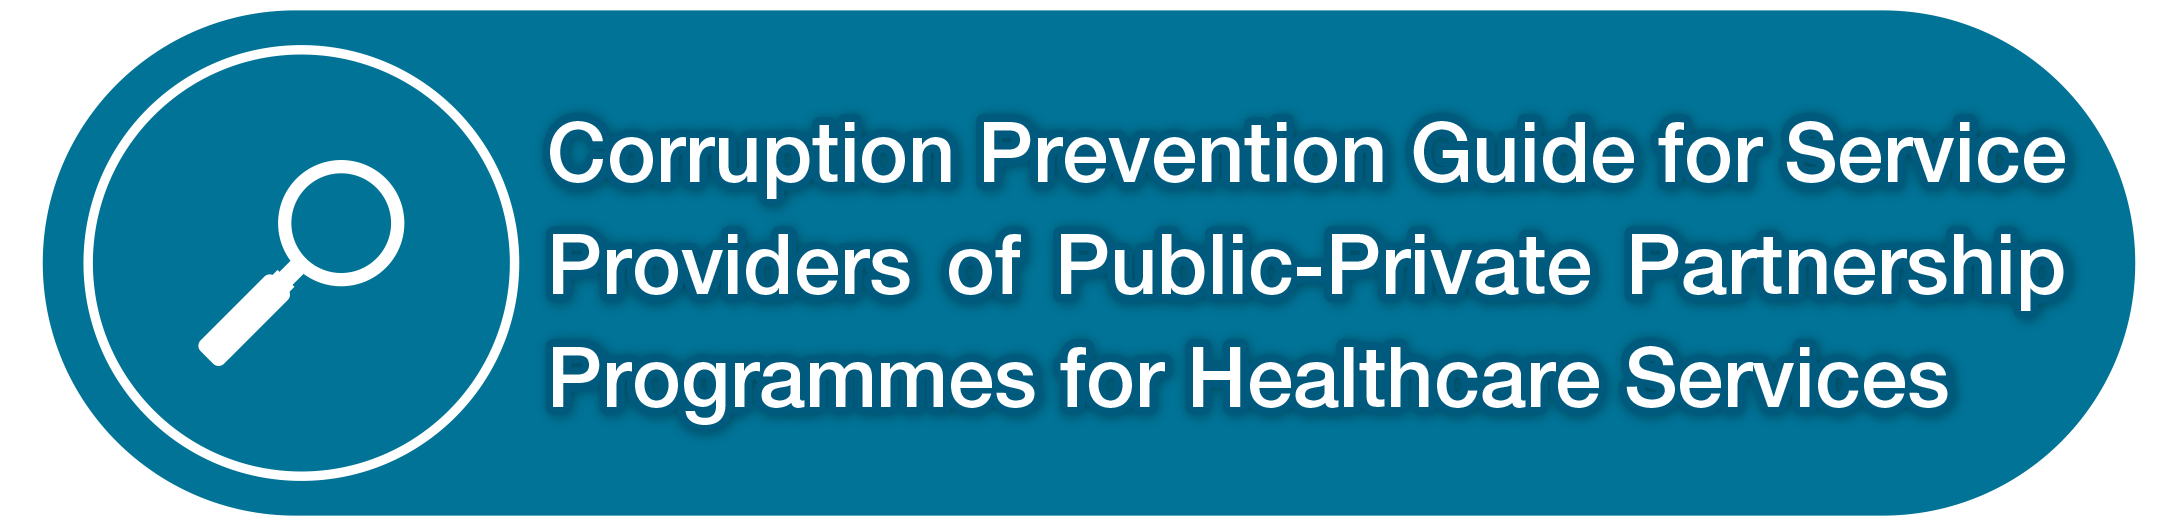 Corruption Prevention Guide for Service Providers of Public-Private Partnership Programmes for Healthcare Services